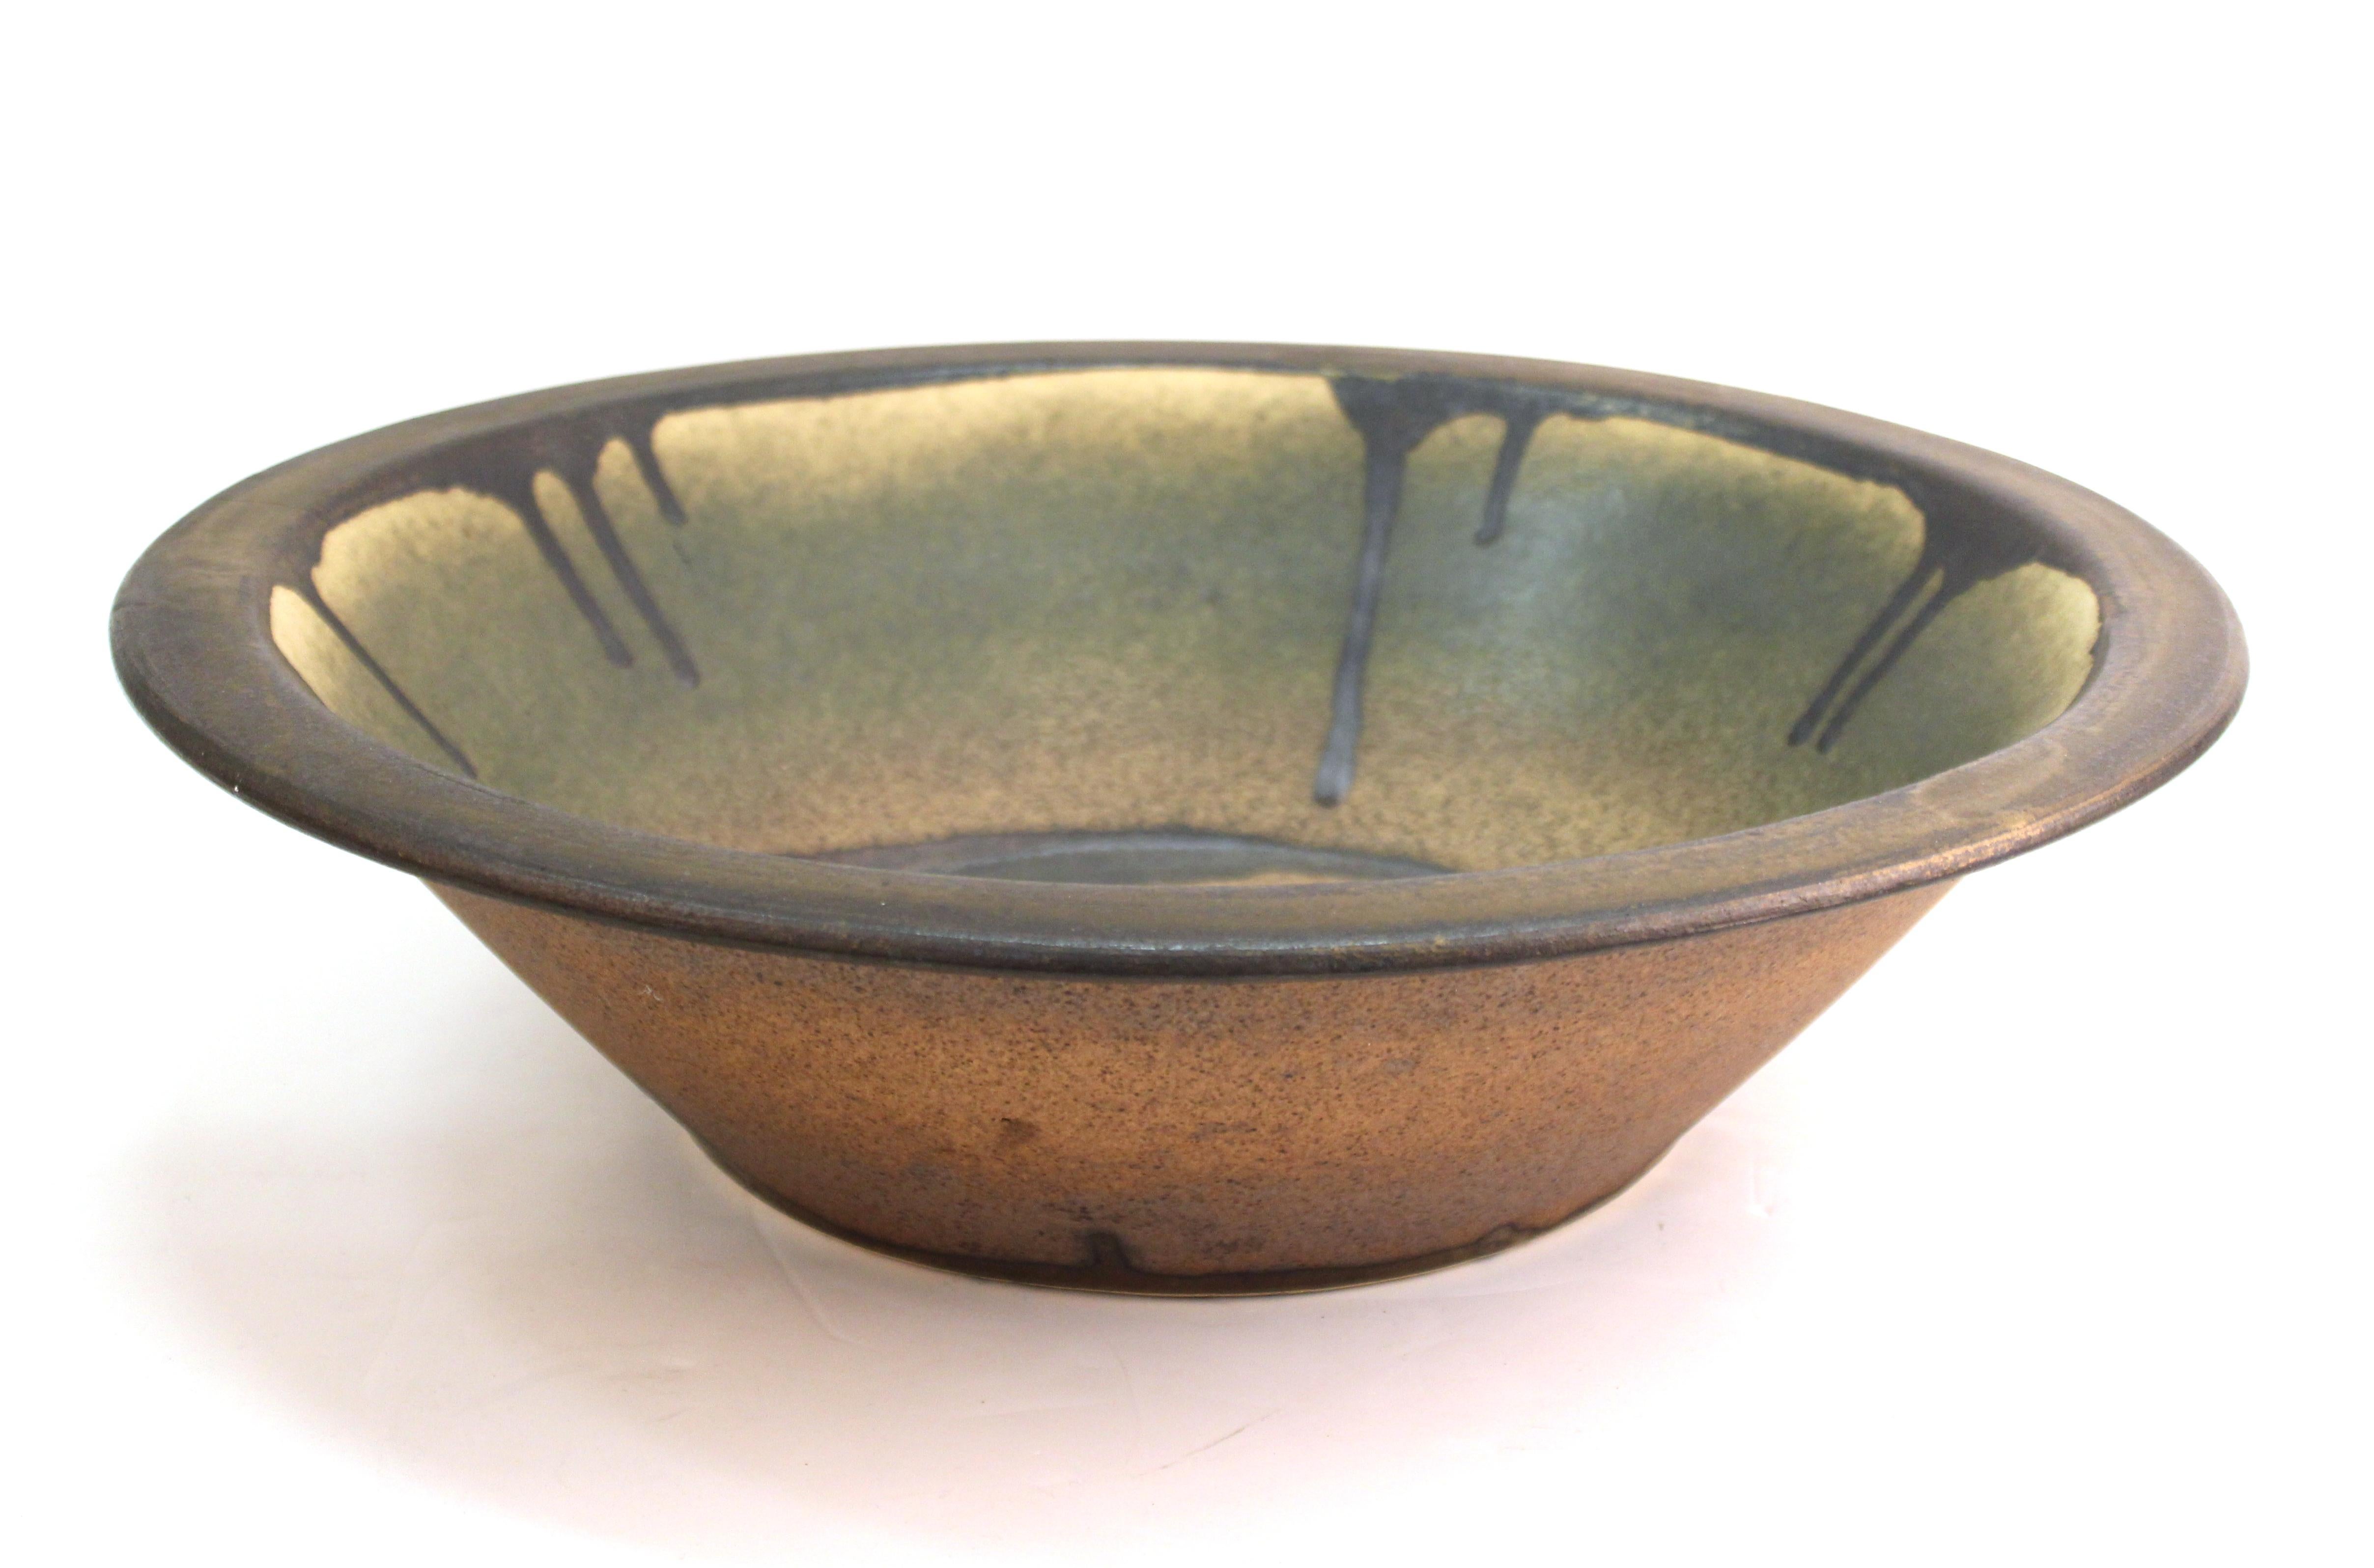 Mid-Century Modern oversized centerpiece pottery charger or bowl. The piece has a drip glaze on the rim and in the center and was made during the mid-20th century. In great vintage condition with age-appropriate wear.